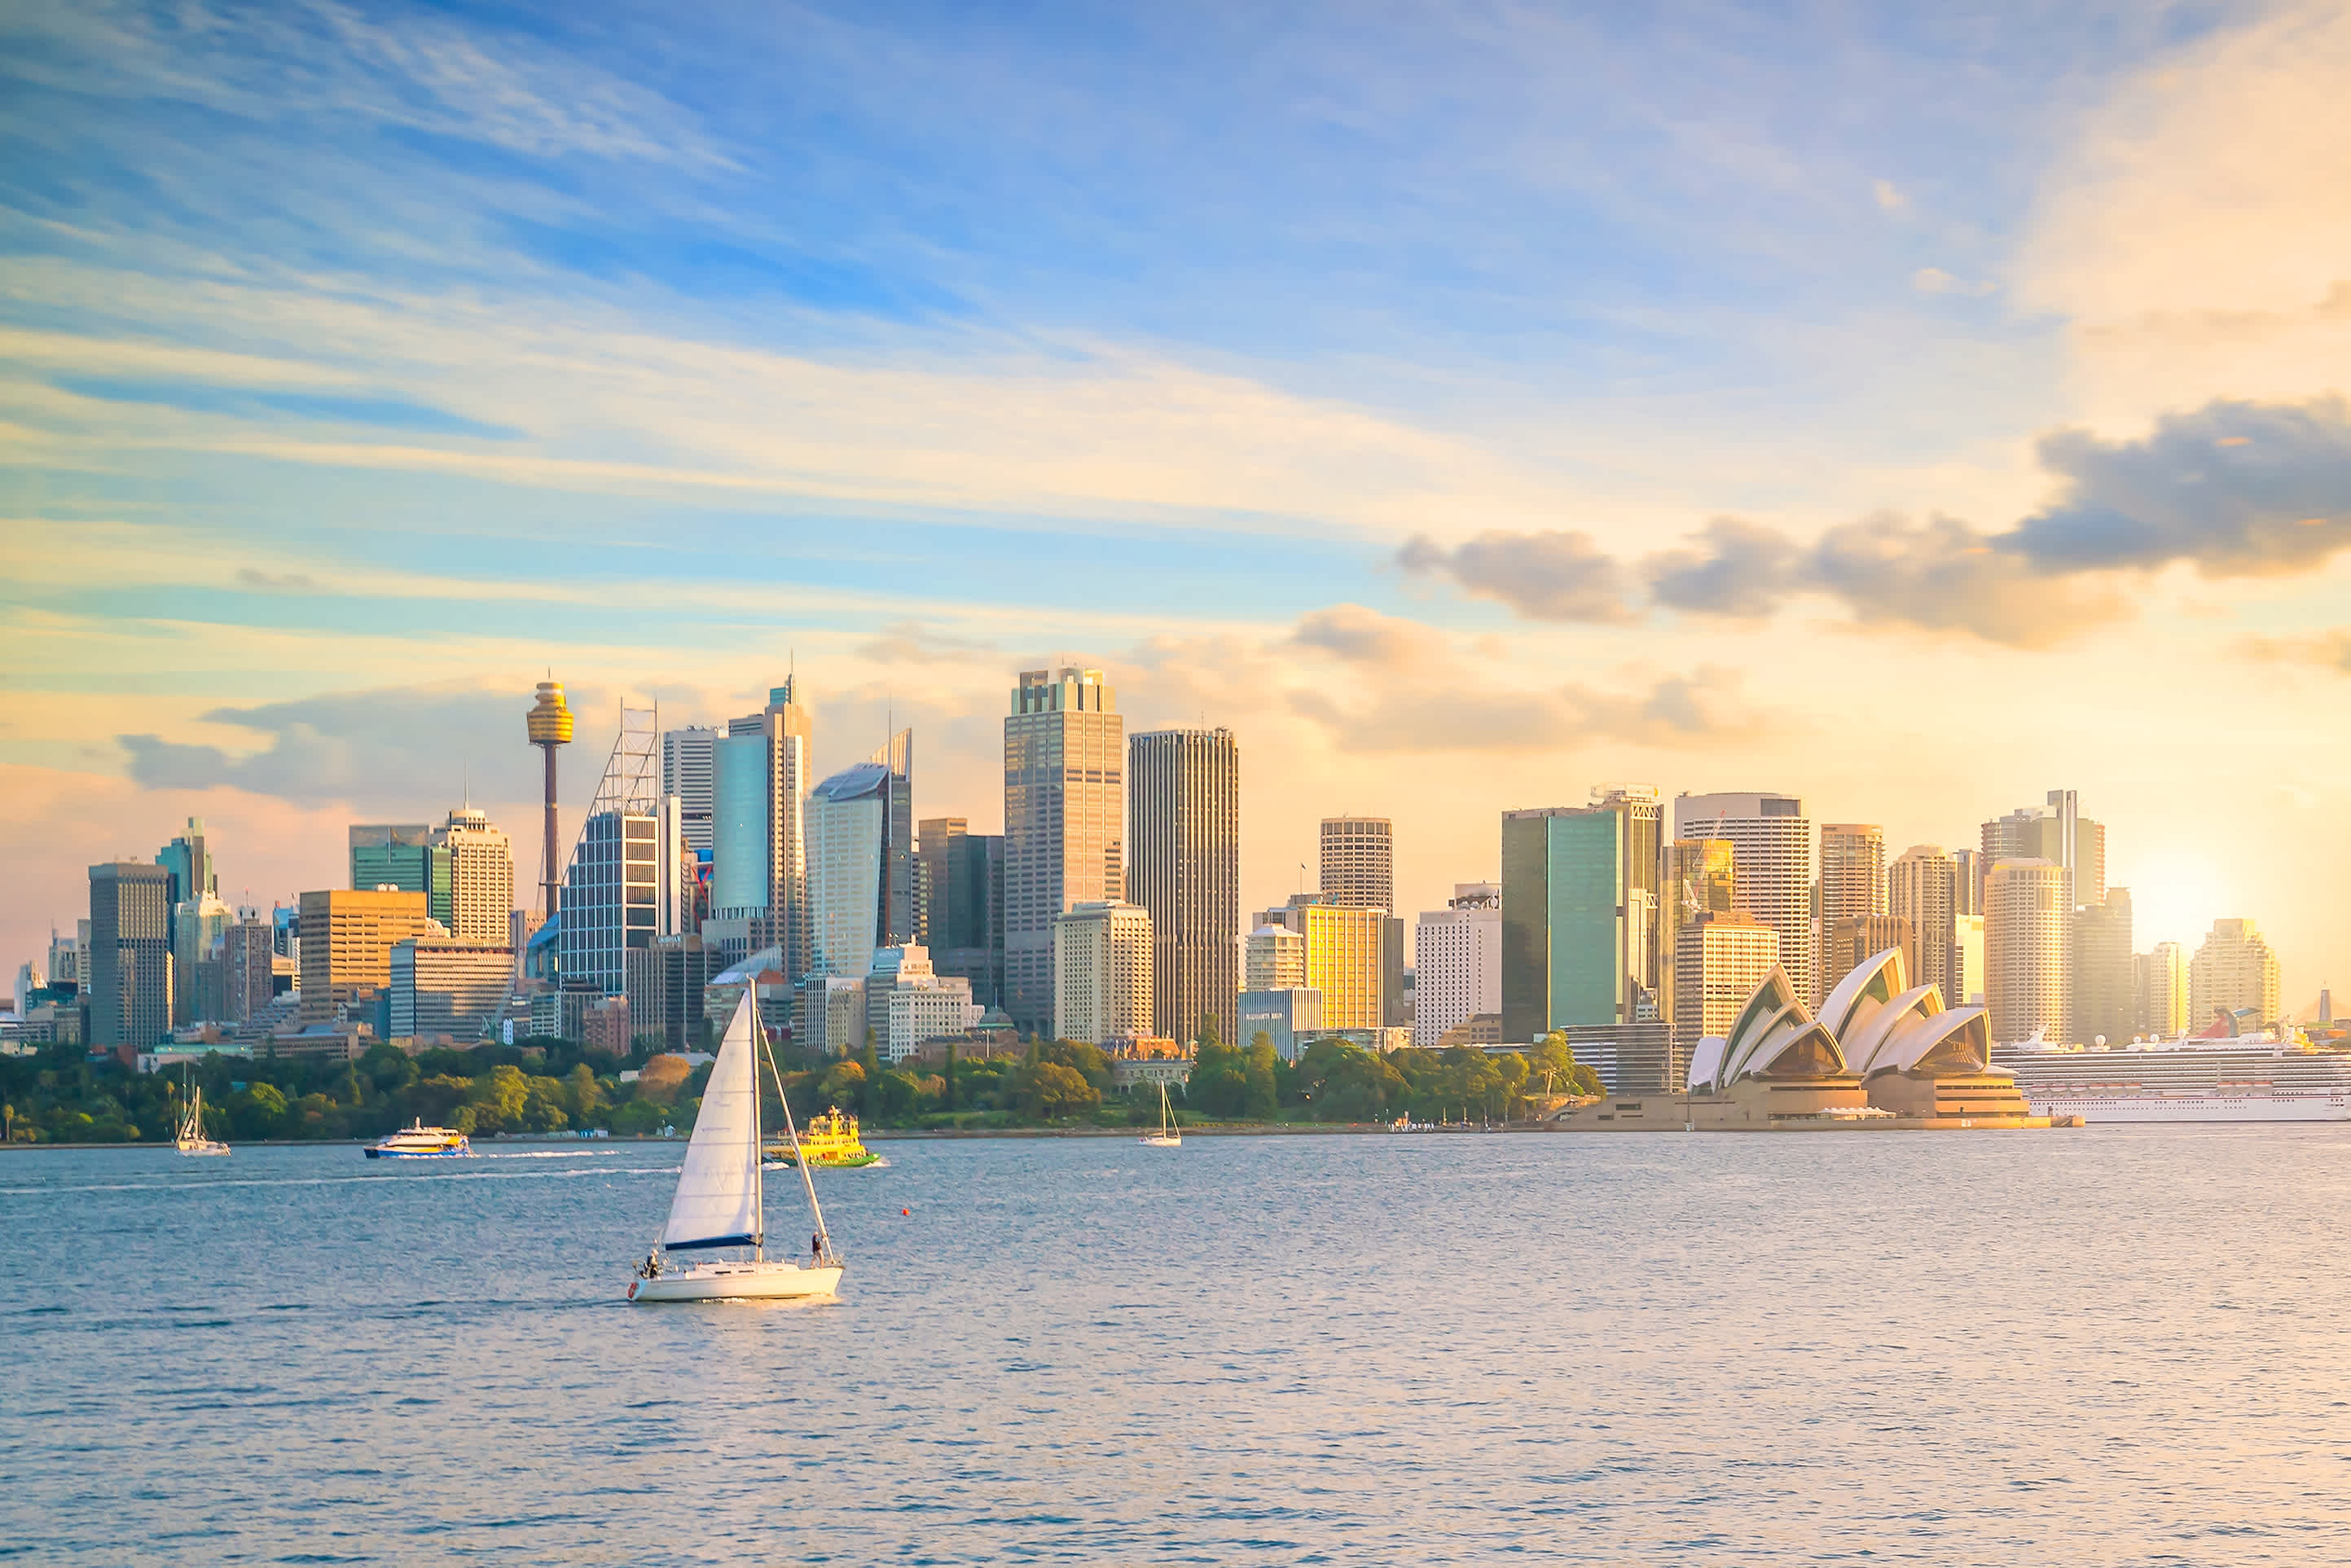 Visit the beautiful city of Sydney, pictured here by the water, on a Sydney vacation